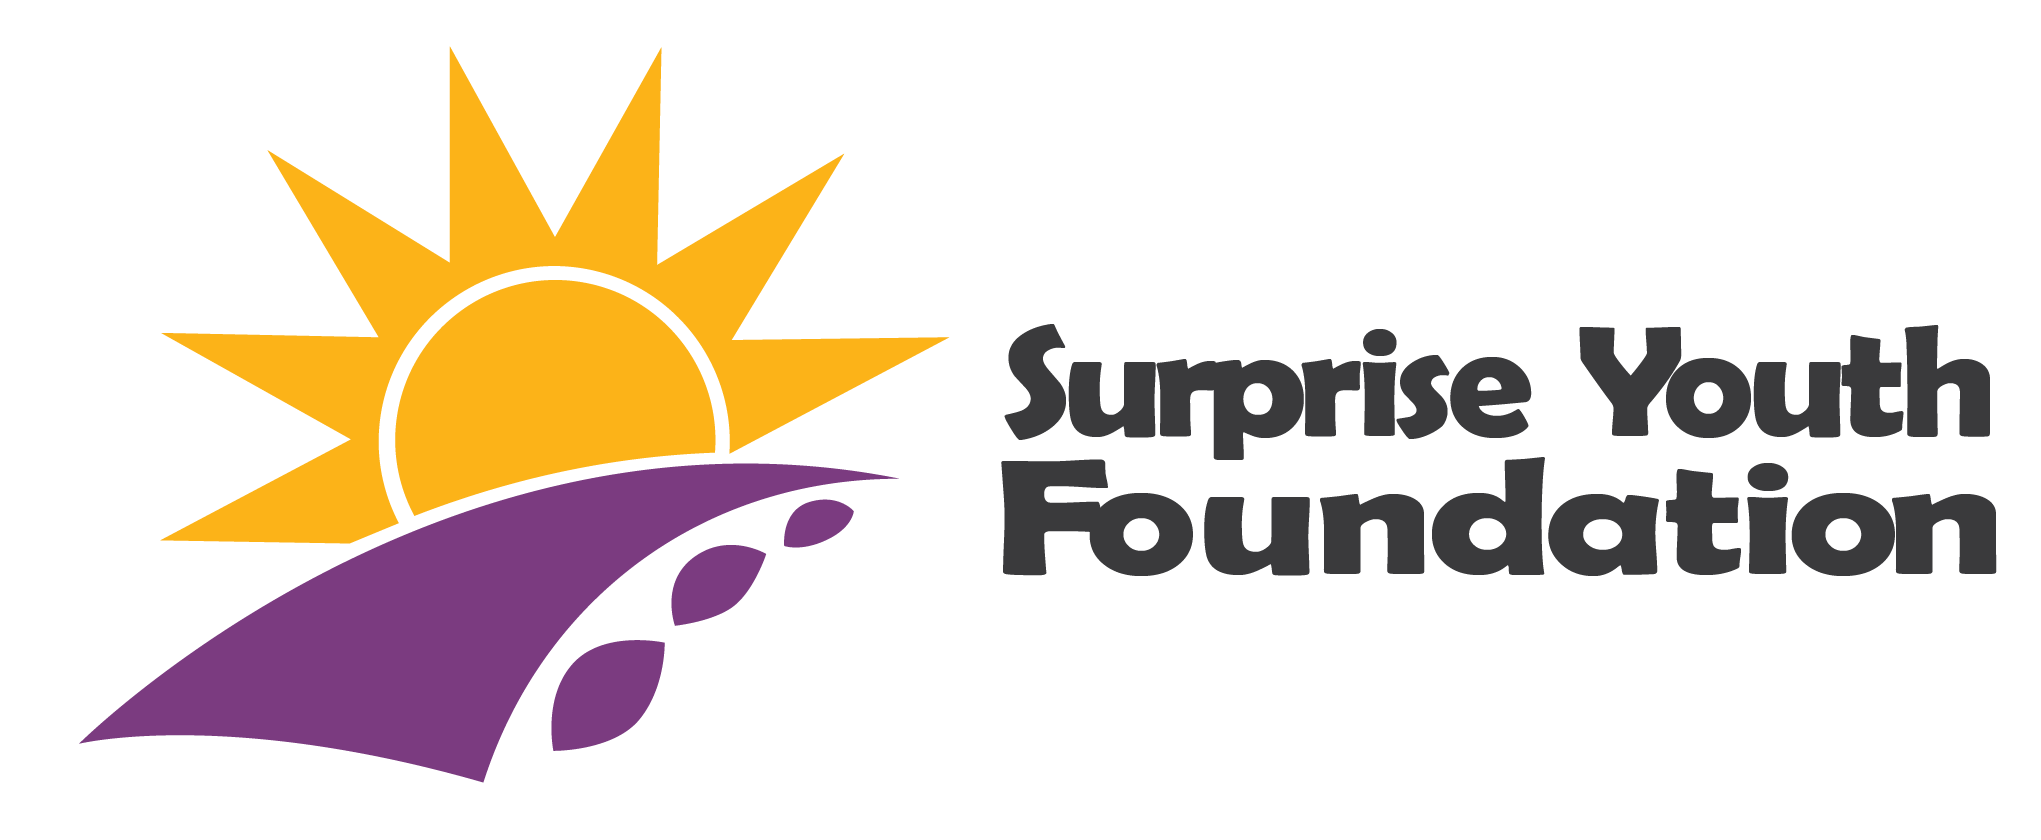 Surprise Youth Foundation